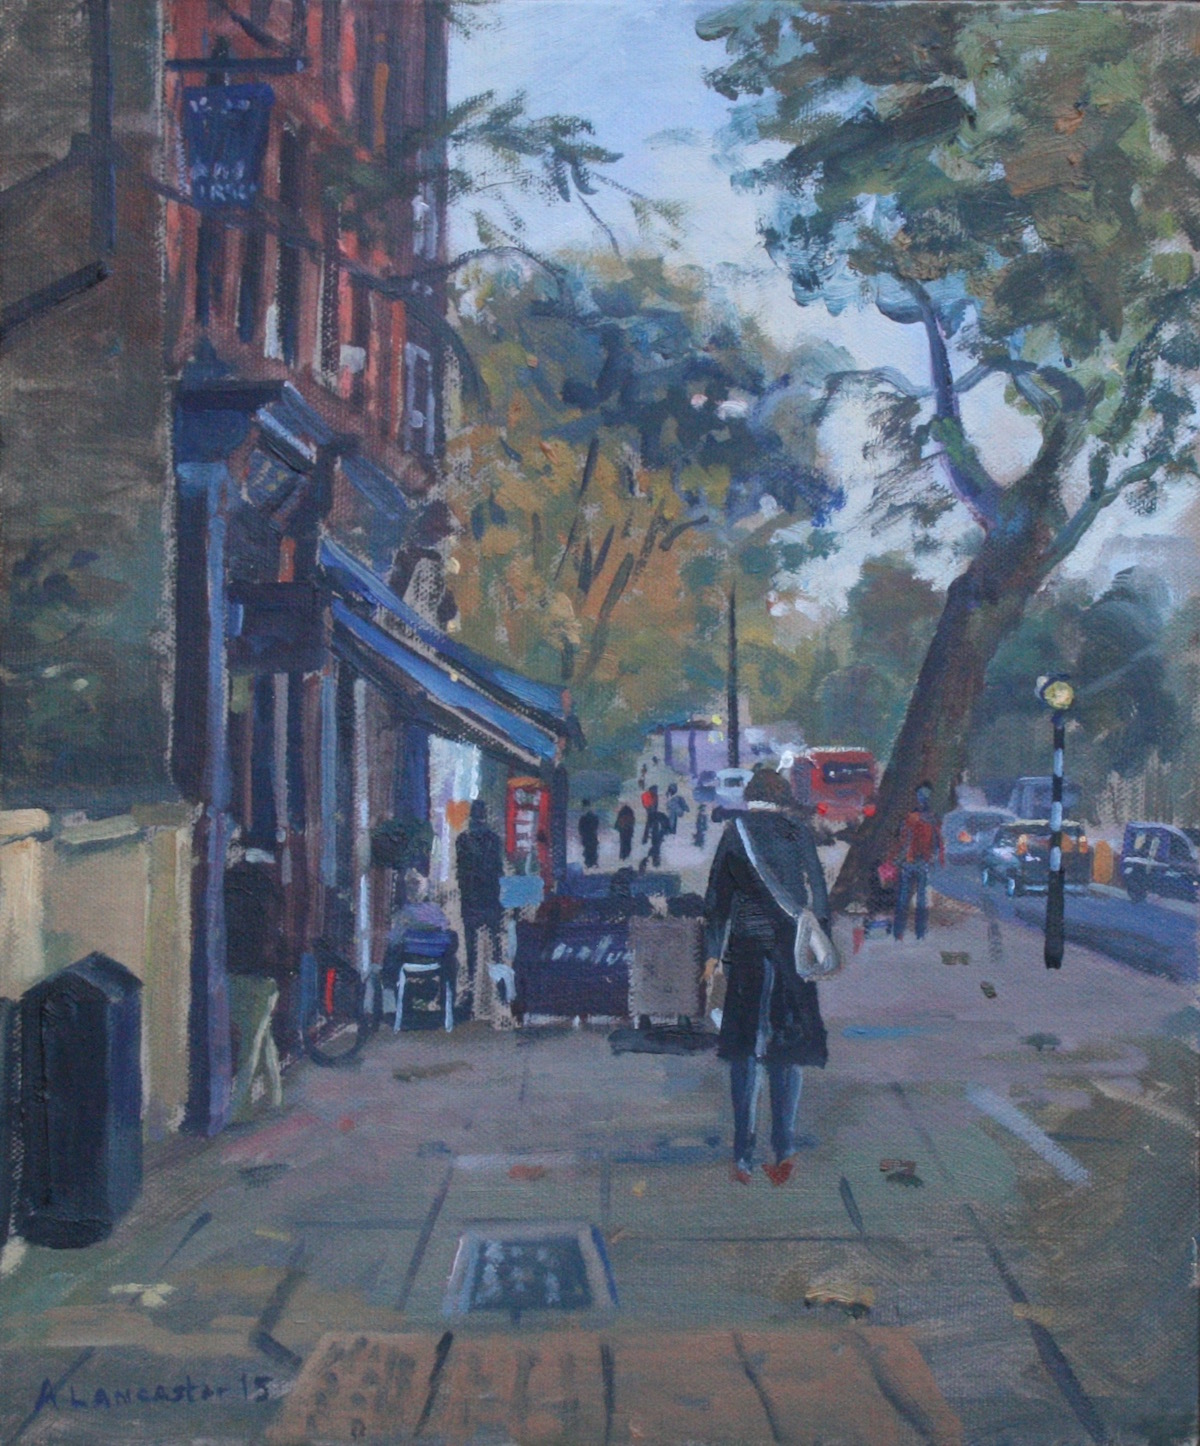 Passing Caluccio's. Hampstead 10" x 12" (SOLD) available as a print on canvas